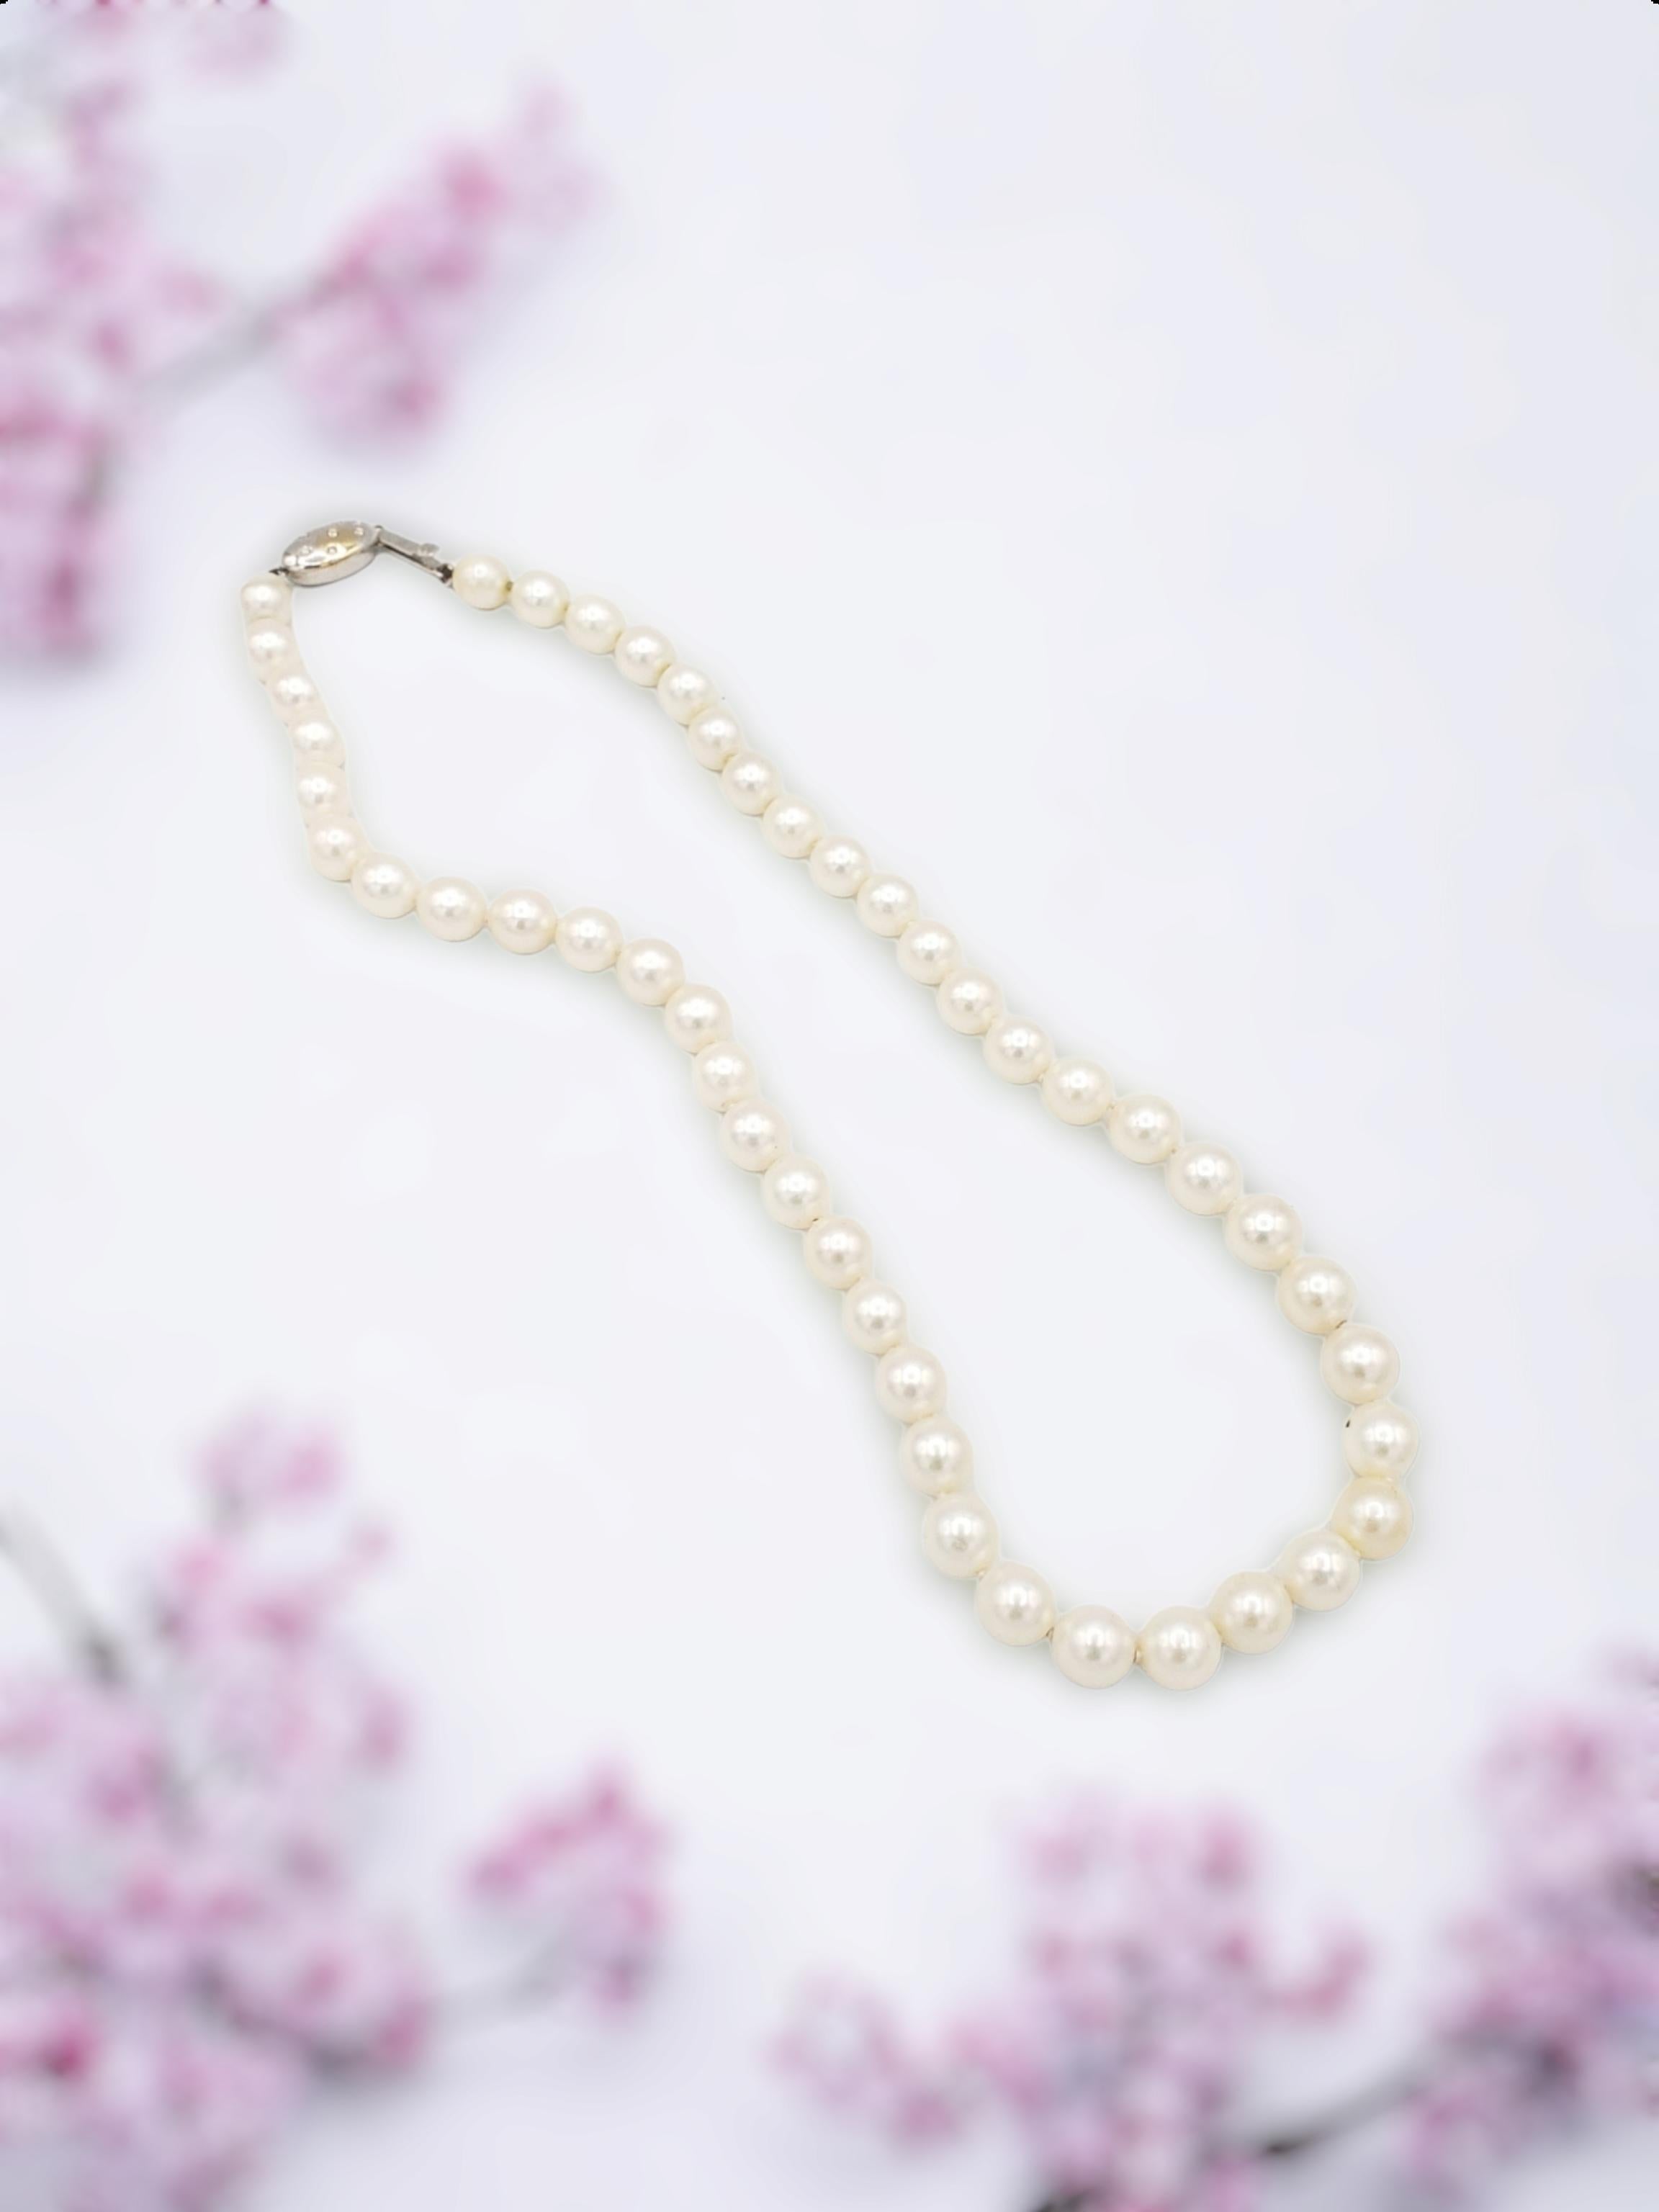 NEW AAA+ Quality Japanese Akoya Salt Water White Pearl Necklace For Sale 8